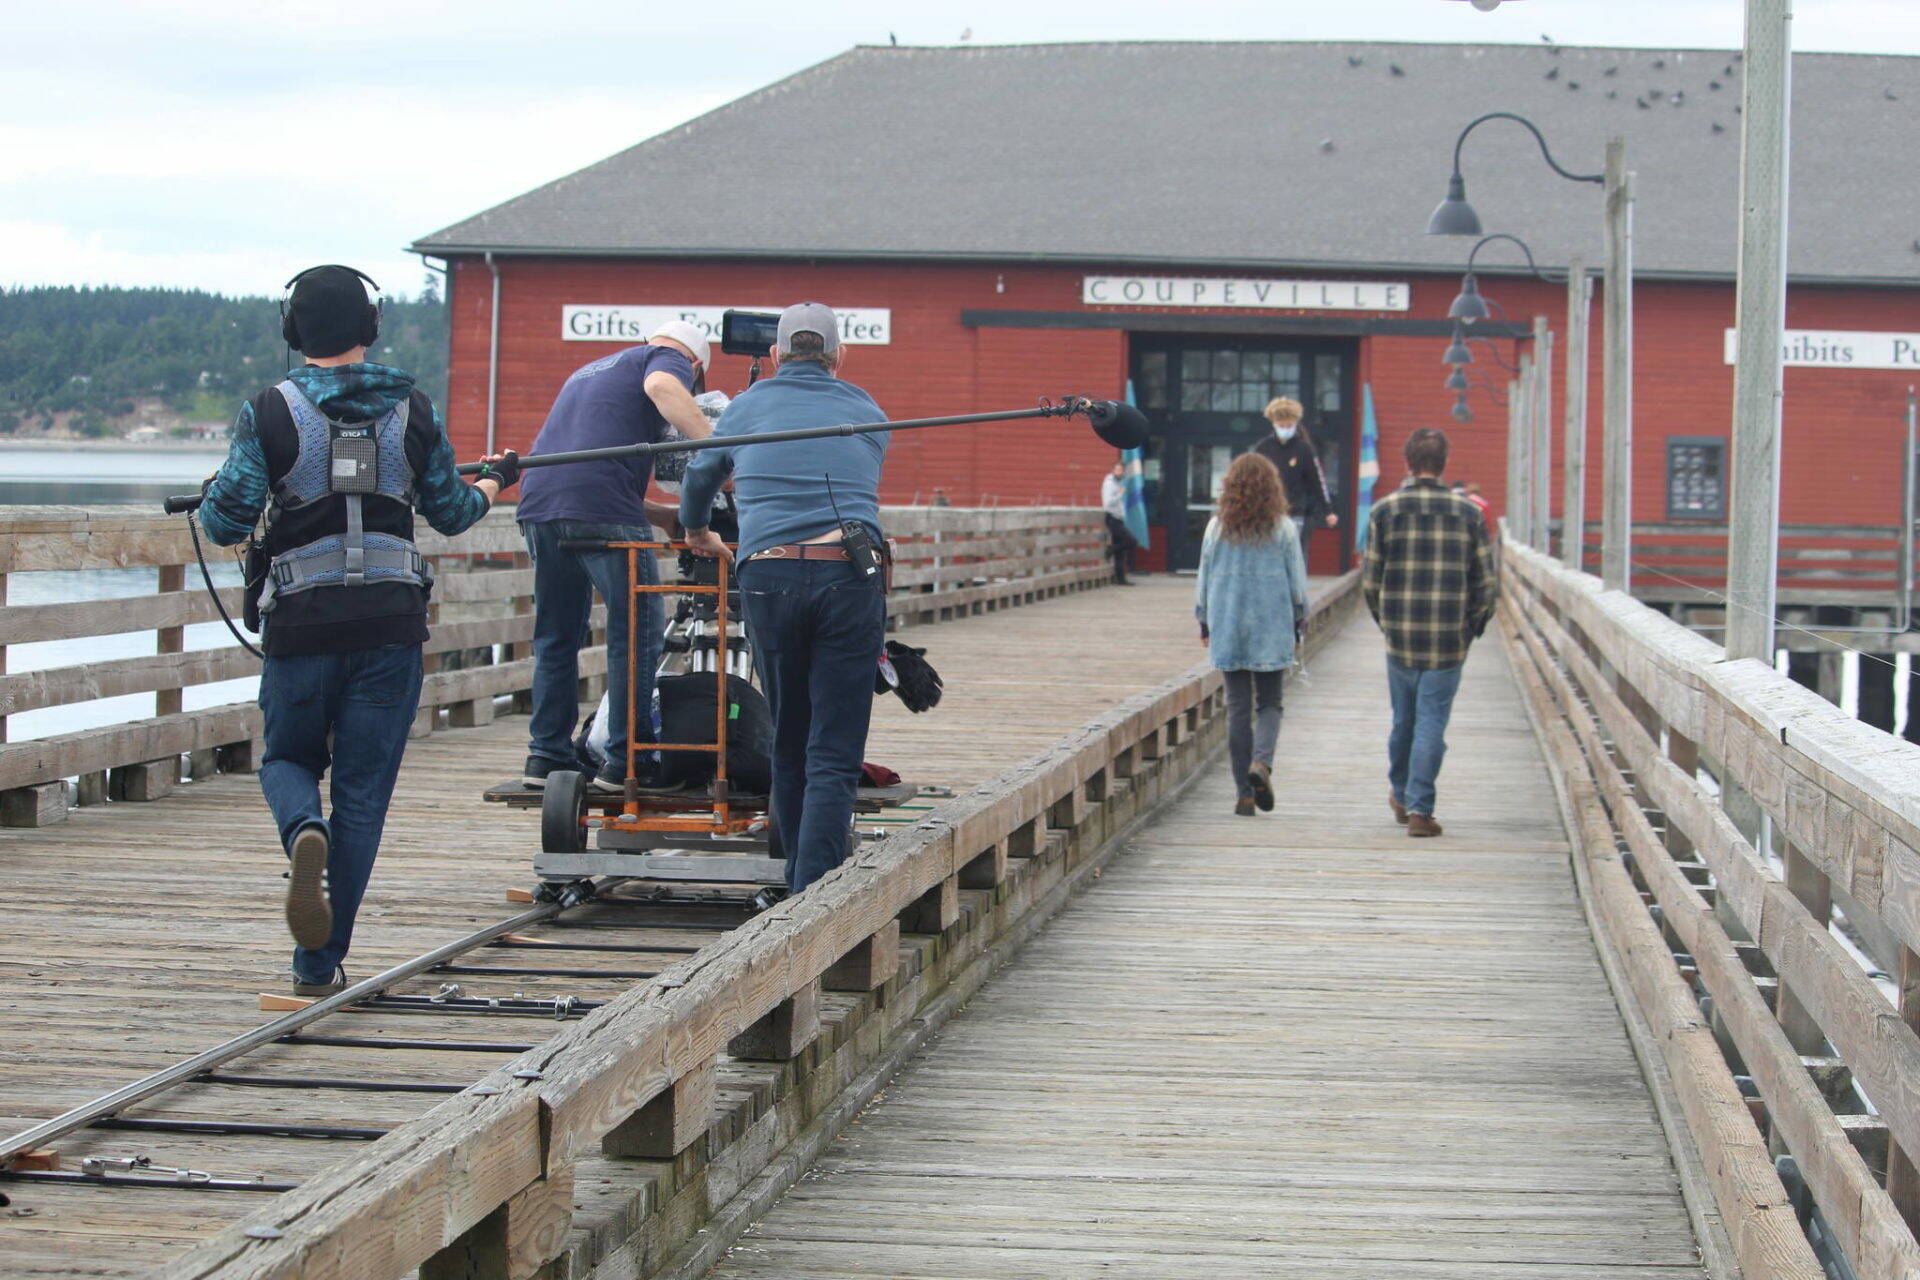 “Midday Black, Midnight Blue” was filmed in part on Whidbey Island last year. The movie will premiere at the Seattle International Film Festival April 21 and is available for online streaming until April 24. (File photo by Karina Andrew/Whidbey News-Times)